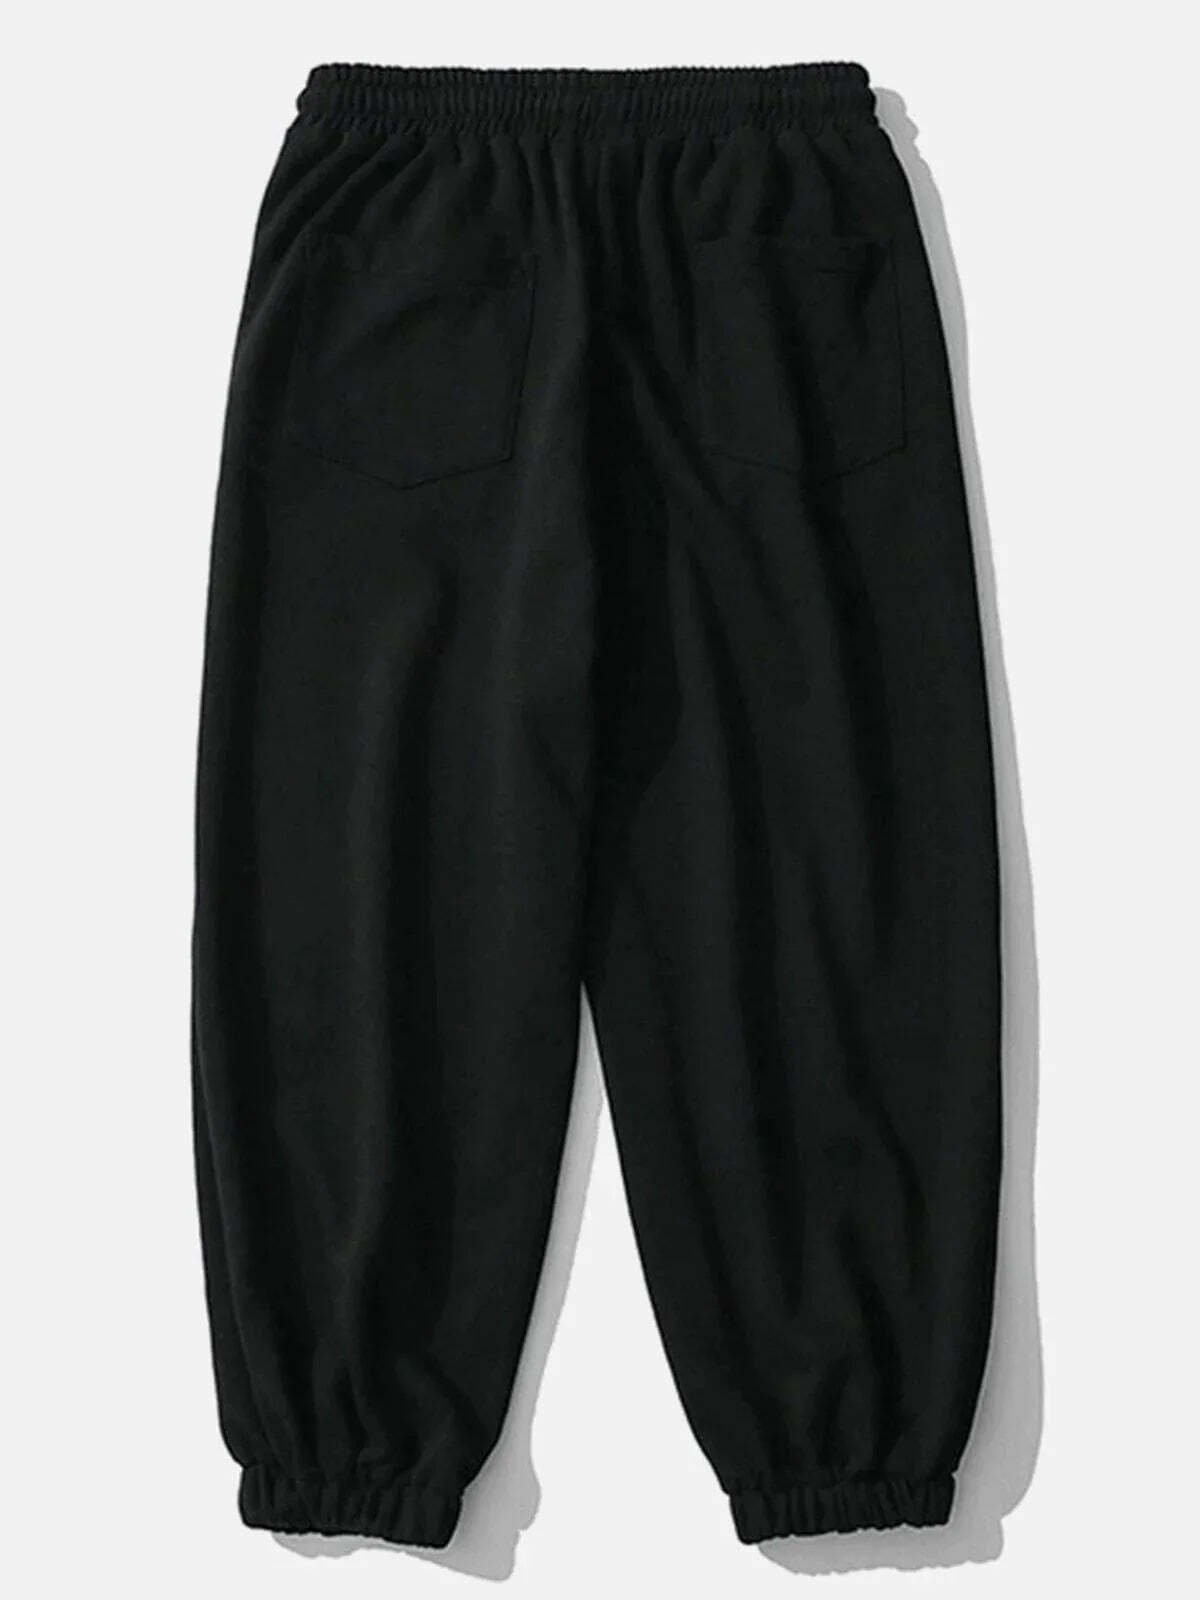 revolutionary patch panel track pants edgy & dynamic streetwear 2961